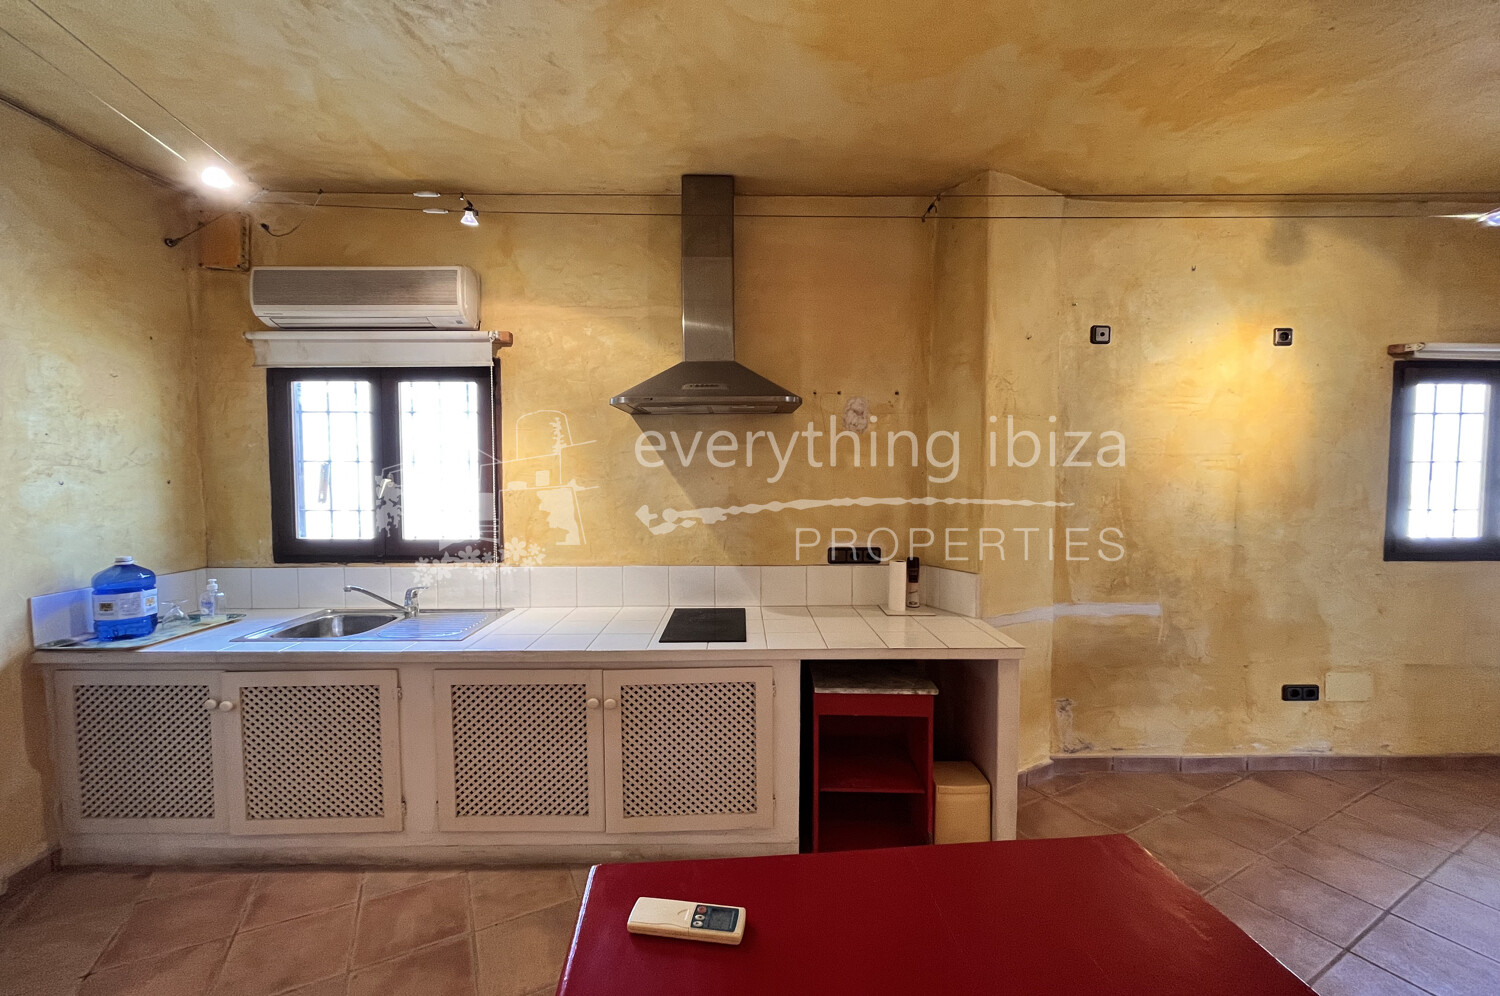 Versatile Commercial Property in the Centre of San Jose, ref. 1640, for sale in Ibiza by everything ibiza Properties